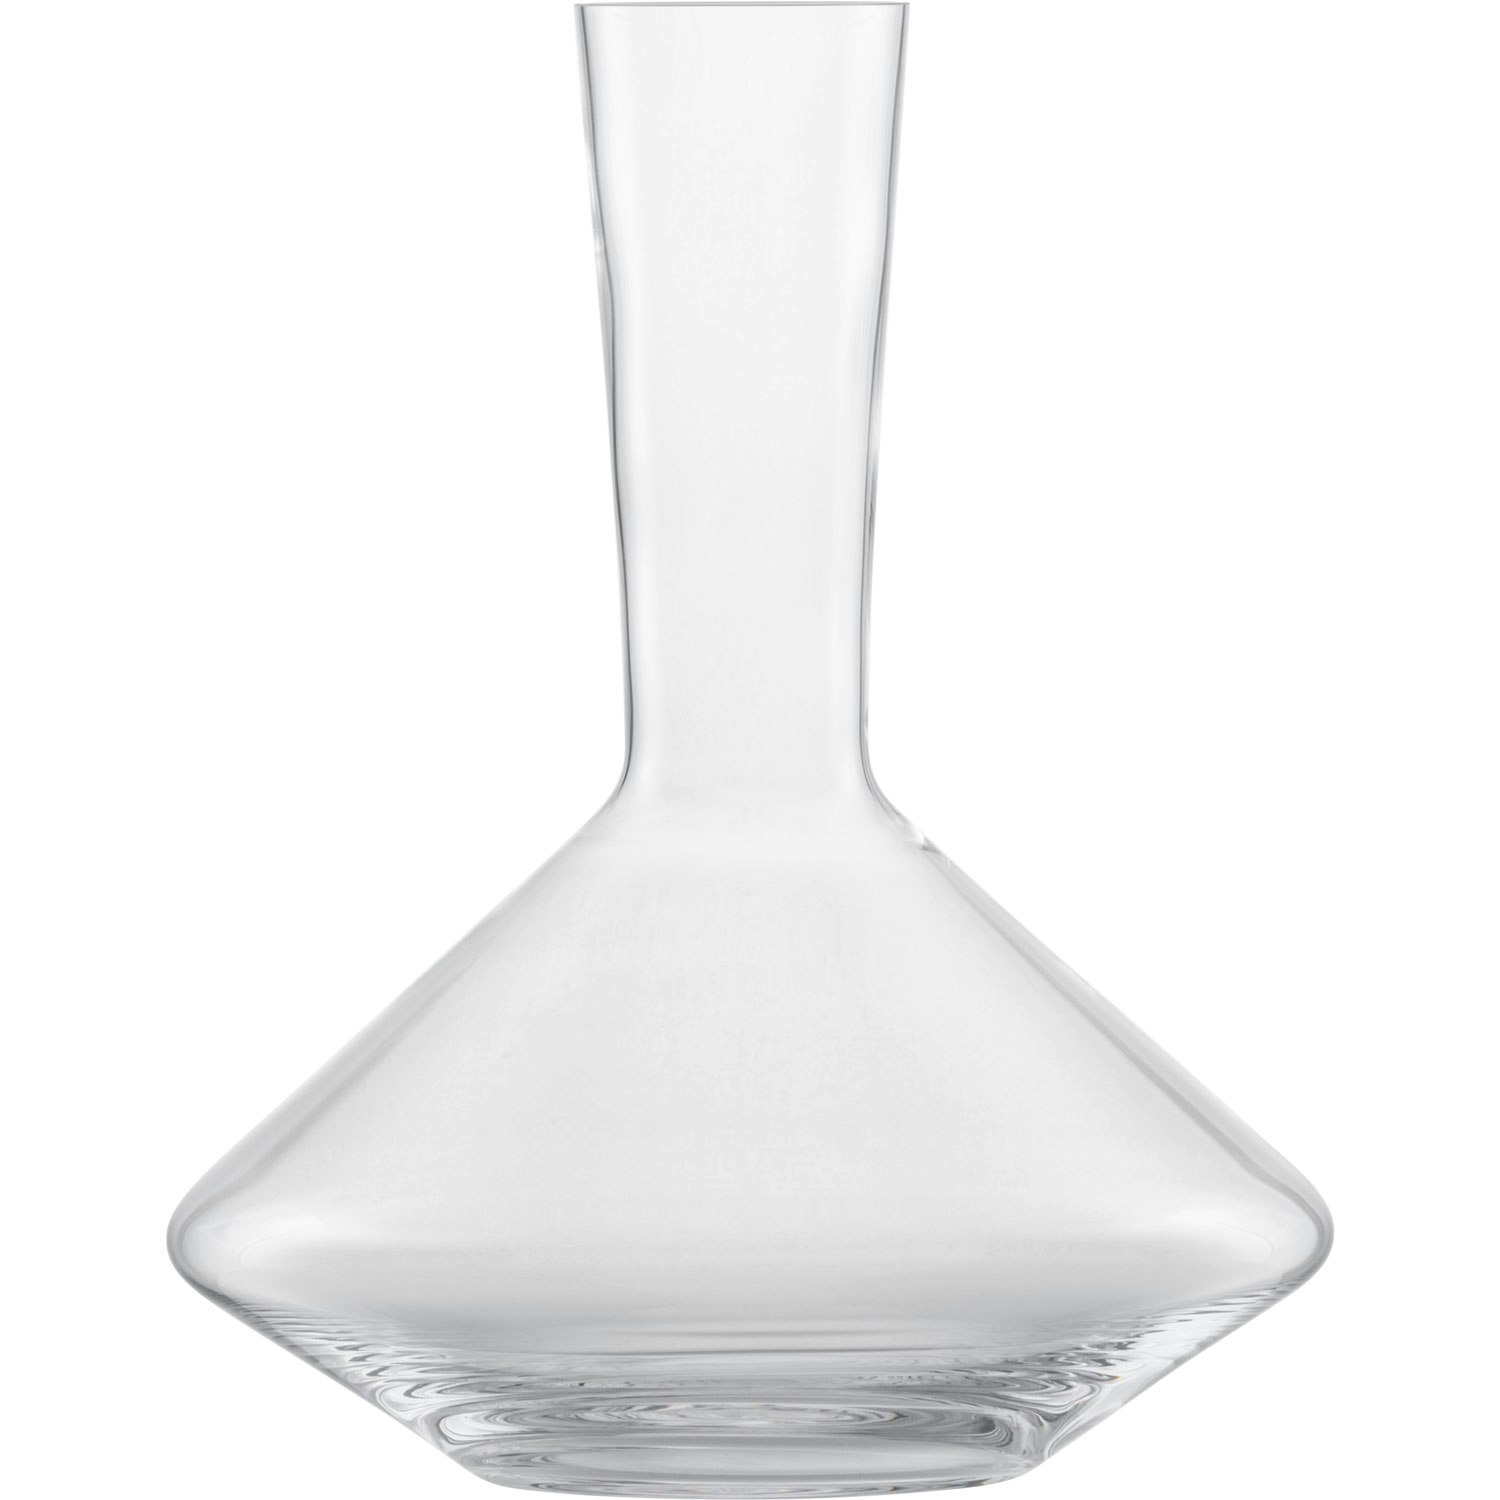 https://royaldesign.com/image/2/zwiesel-pure-carafe-for-red-wine-75-cl-0